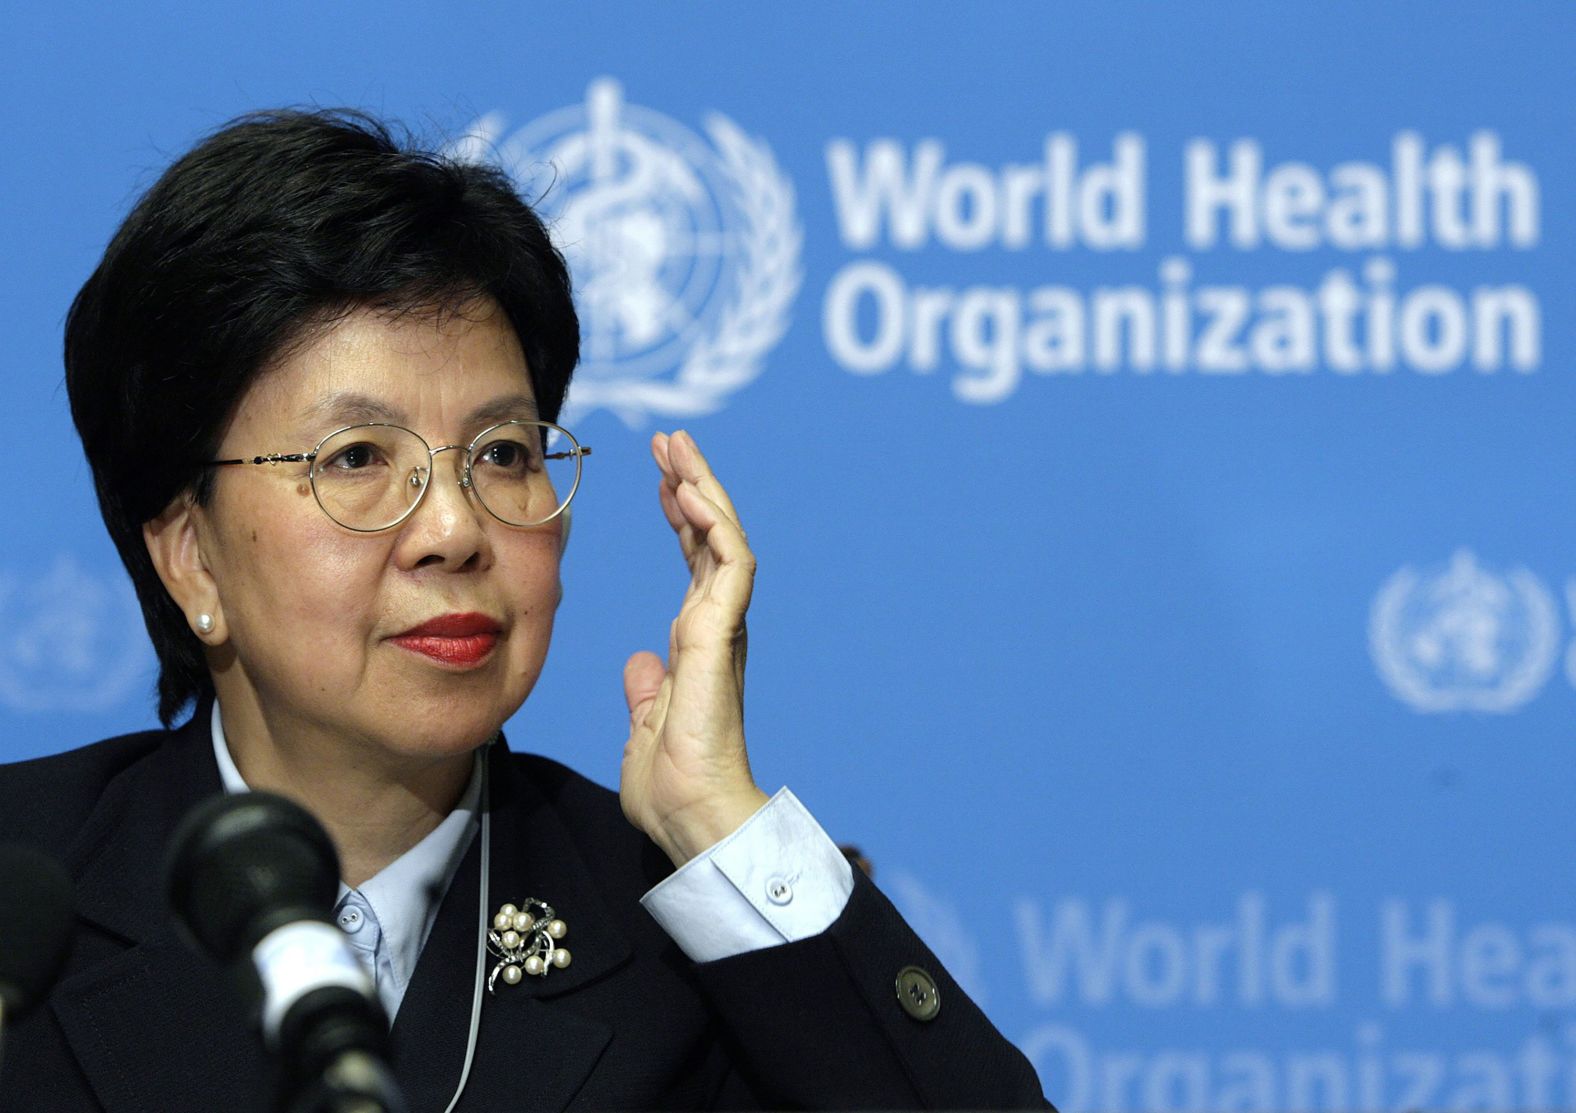 Margaret Chan, the newly-elected director-general of the World Health Organization, answers questions during a news conference at the WHO headquarters in Geneva, Switzerland, in 2006. Chan made history as the first Chinese head of a United Nations organization.